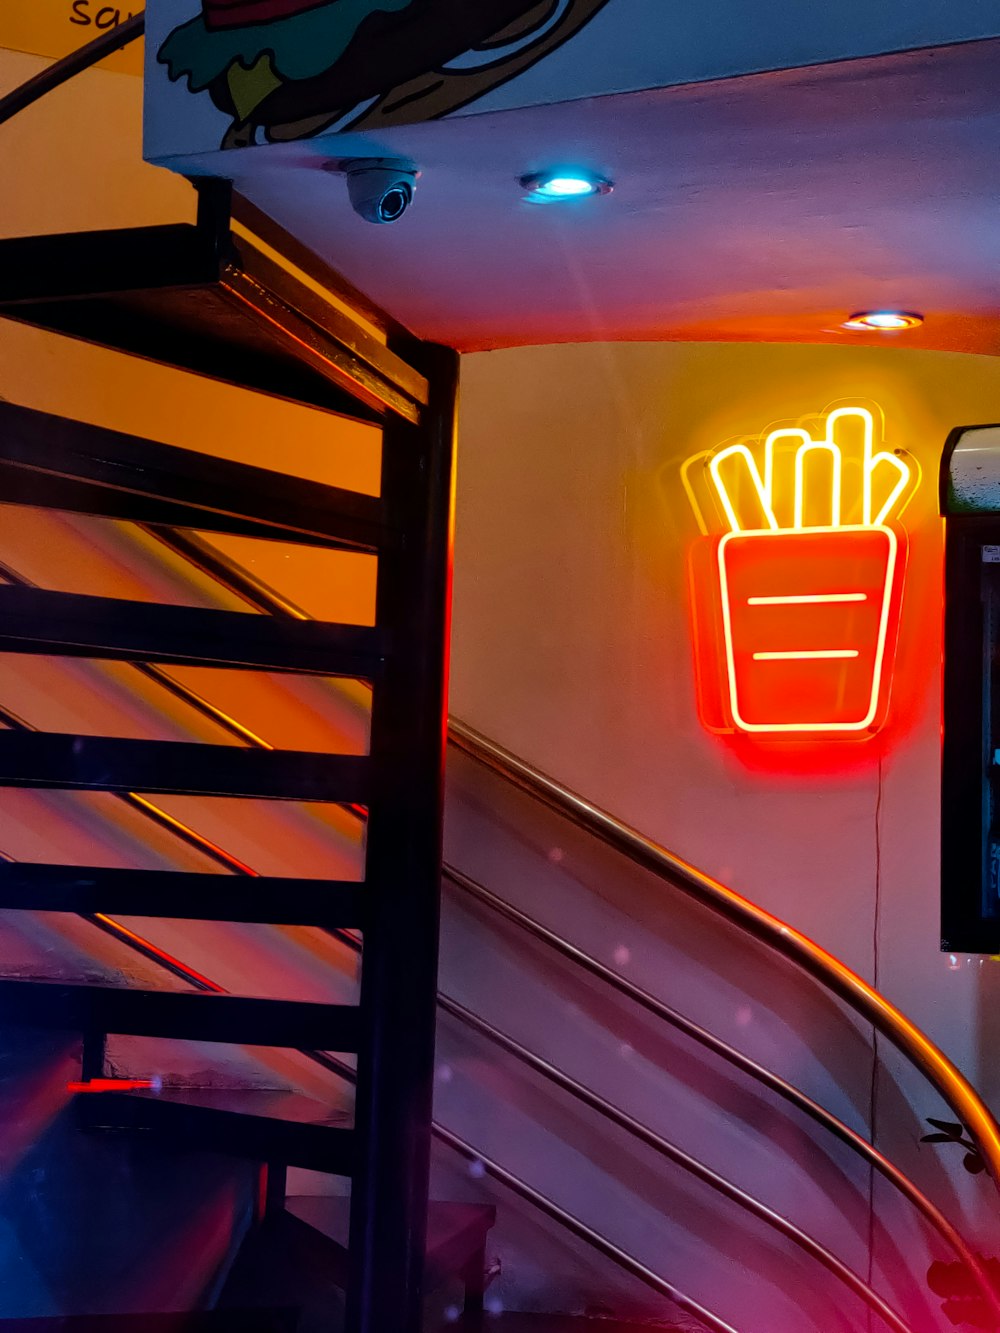 a neon sign on the wall of a restaurant